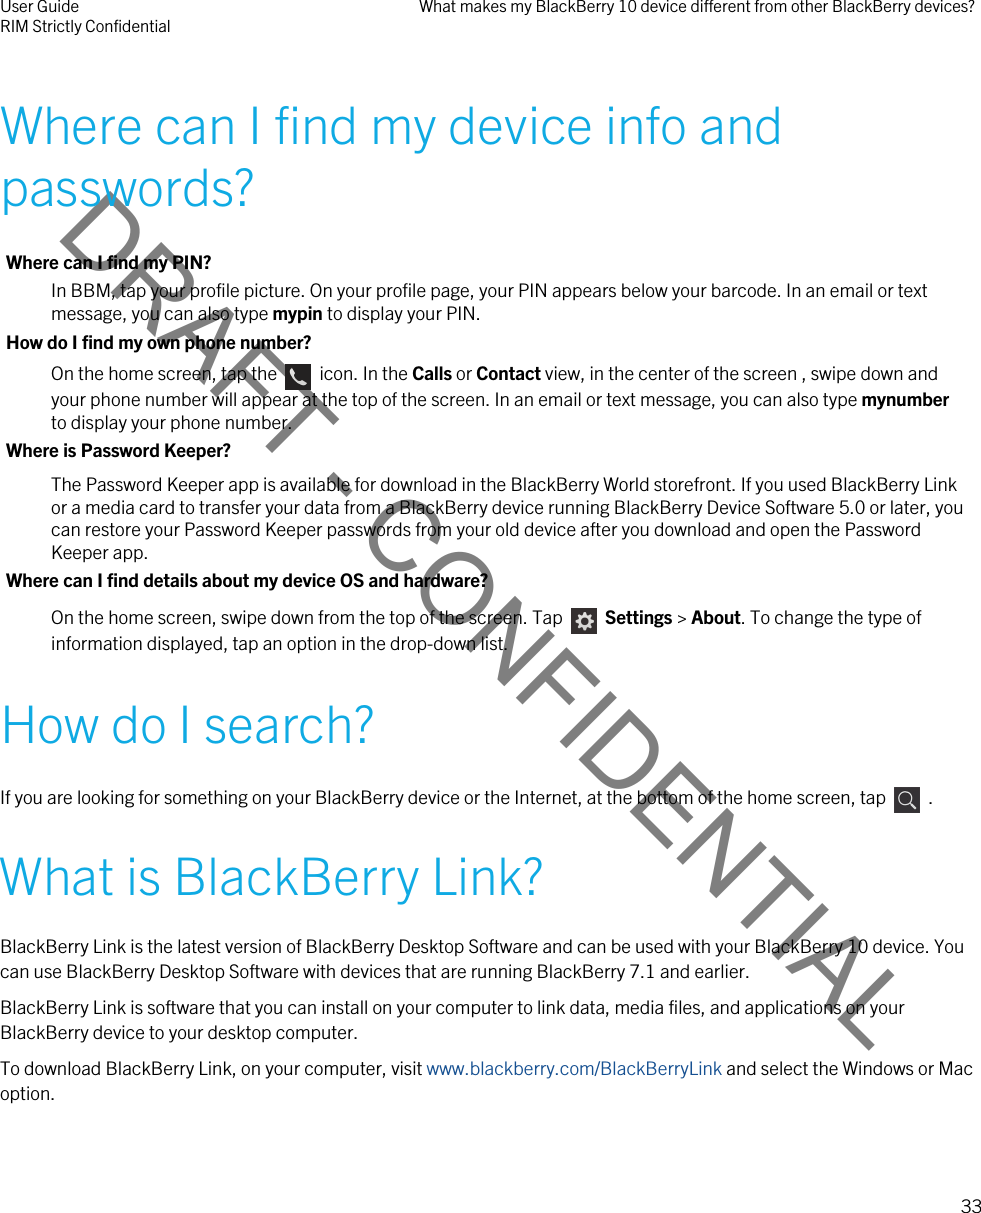 DRAFT - CONFIDENTIALWhere can I find my device info and passwords?Where can I find my PIN?In BBM, tap your profile picture. On your profile page, your PIN appears below your barcode. In an email or text message, you can also type mypin to display your PIN.How do I find my own phone number?On the home screen, tap the    icon. In the Calls or Contact view, in the center of the screen , swipe down and your phone number will appear at the top of the screen. In an email or text message, you can also type mynumber to display your phone number.Where is Password Keeper?The Password Keeper app is available for download in the BlackBerry World storefront. If you used BlackBerry Link or a media card to transfer your data from a BlackBerry device running BlackBerry Device Software 5.0 or later, you can restore your Password Keeper passwords from your old device after you download and open the Password Keeper app.Where can I find details about my device OS and hardware?On the home screen, swipe down from the top of the screen. Tap    Settings &gt; About. To change the type of information displayed, tap an option in the drop-down list.How do I search?If you are looking for something on your BlackBerry device or the Internet, at the bottom of the home screen, tap    .What is BlackBerry Link?BlackBerry Link is the latest version of BlackBerry Desktop Software and can be used with your BlackBerry 10 device. You can use BlackBerry Desktop Software with devices that are running BlackBerry 7.1 and earlier.BlackBerry Link is software that you can install on your computer to link data, media files, and applications on your BlackBerry device to your desktop computer.To download BlackBerry Link, on your computer, visit www.blackberry.com/BlackBerryLink and select the Windows or Mac option.User GuideRIM Strictly Confidential What makes my BlackBerry 10 device different from other BlackBerry devices?33 